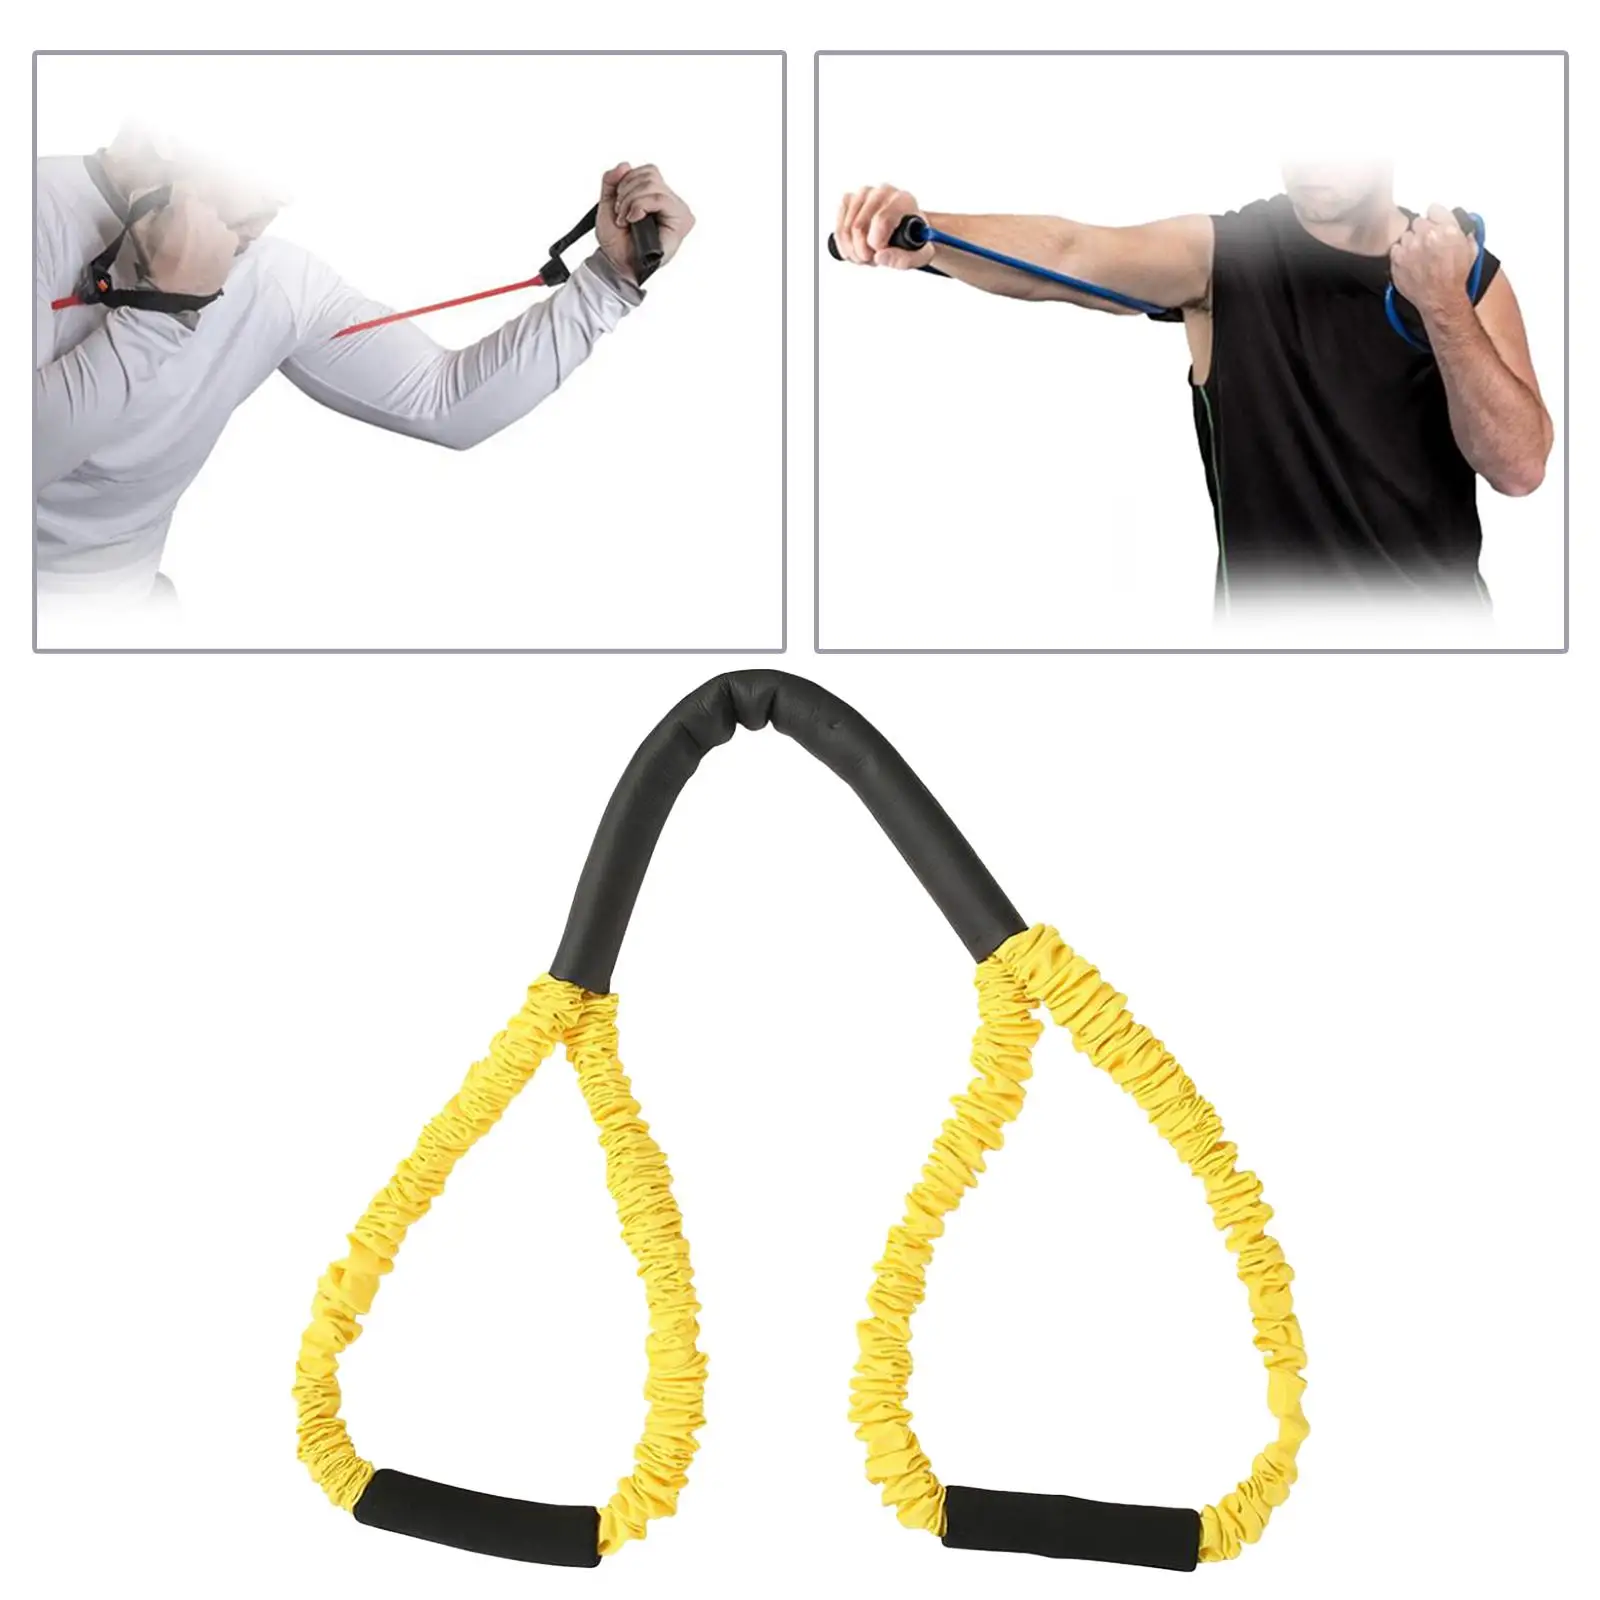 Boxing Resistance Bands Punching Powers Speed Agility Training Exercise Bands for Basketball Mma Taekwondo Women Men Volleyball